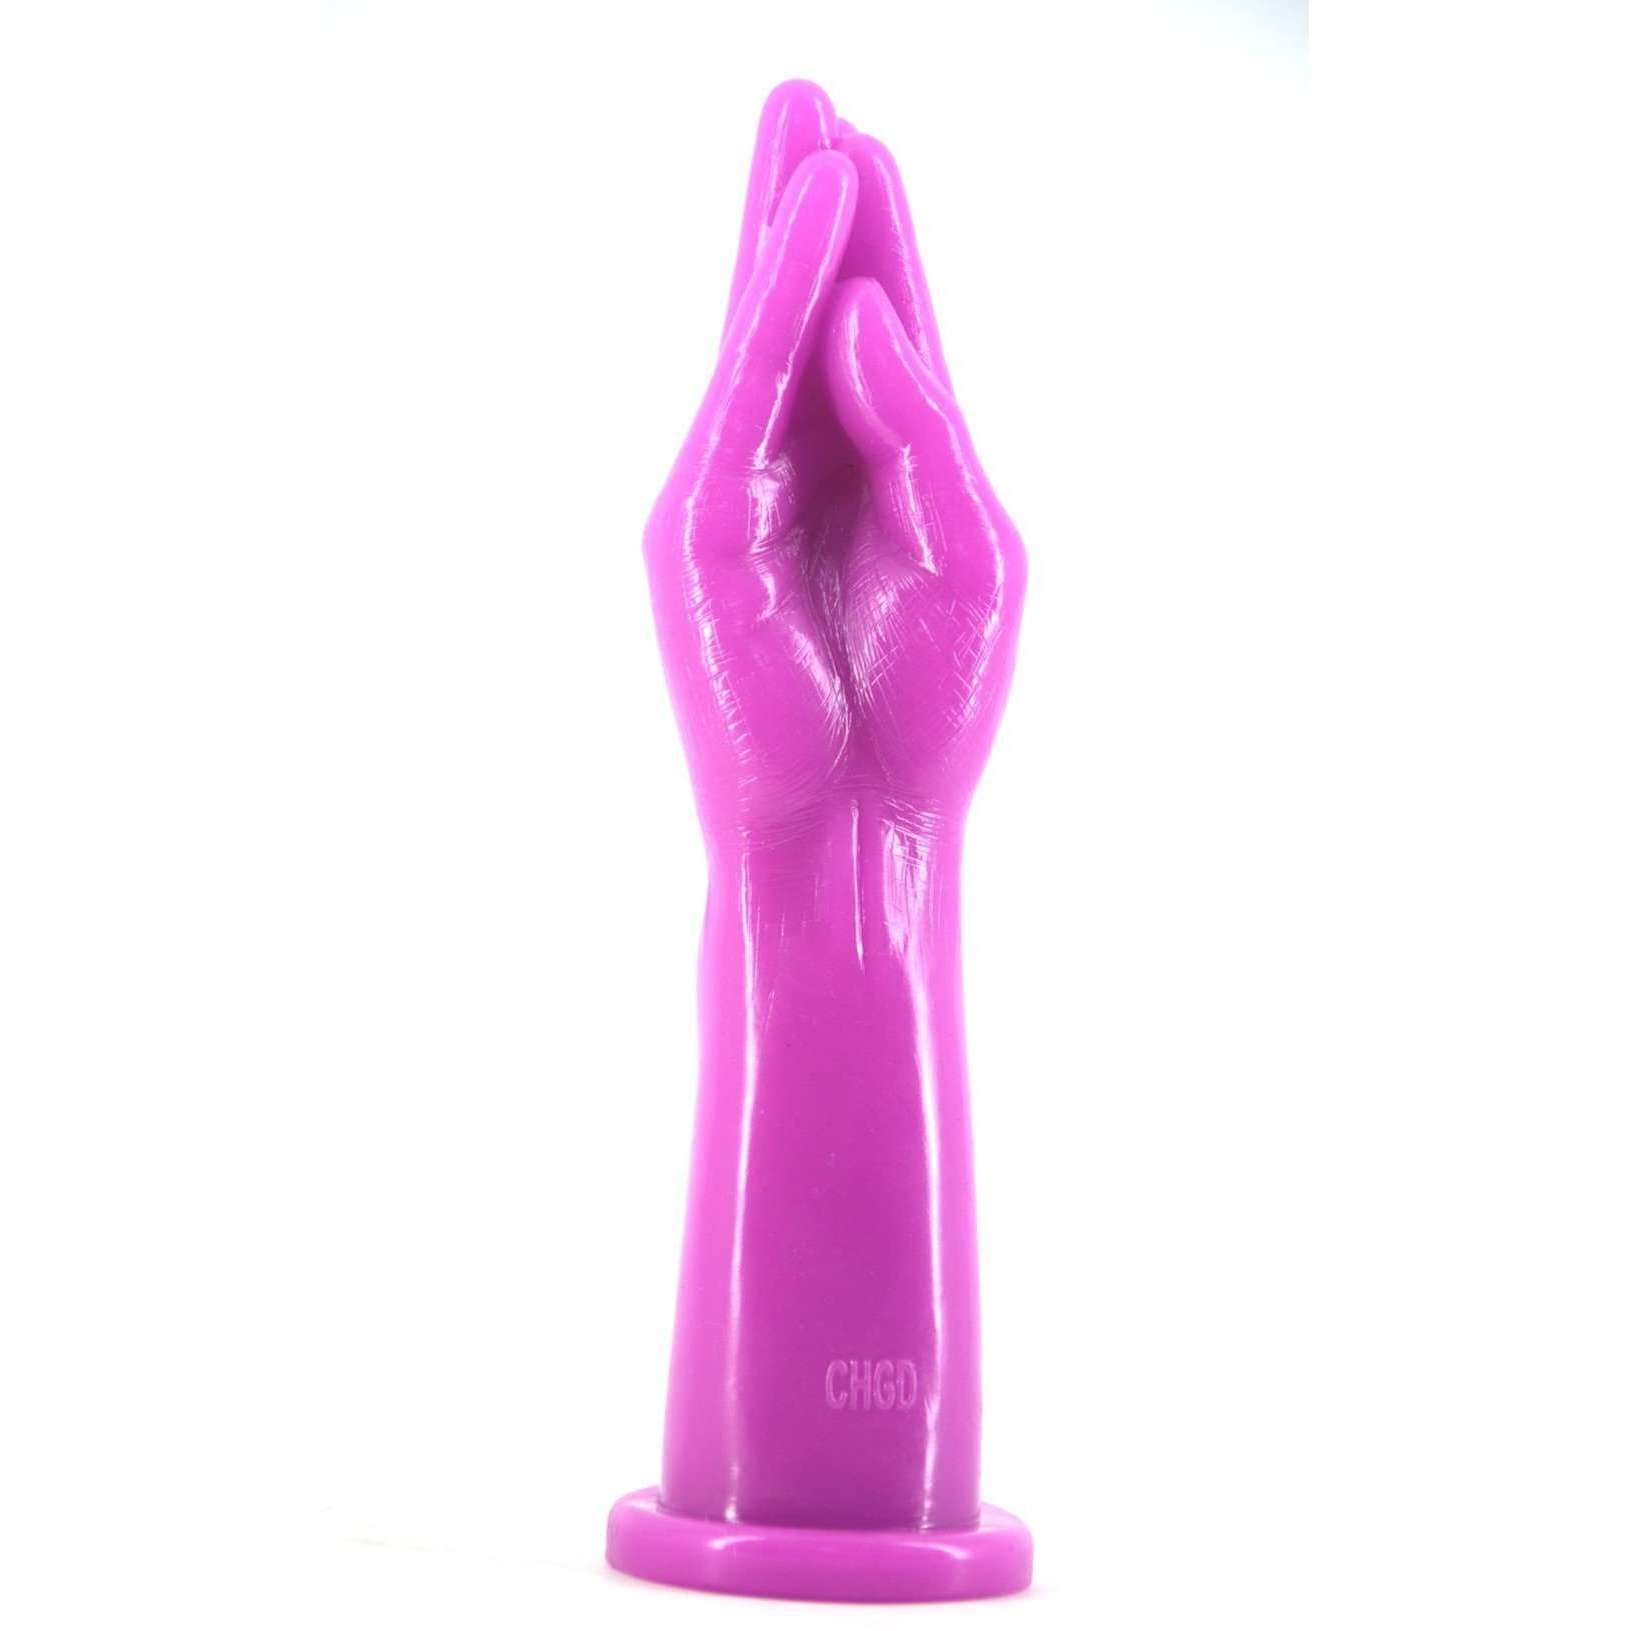 "Give A Hand" Fisting Dildo. Slide 8